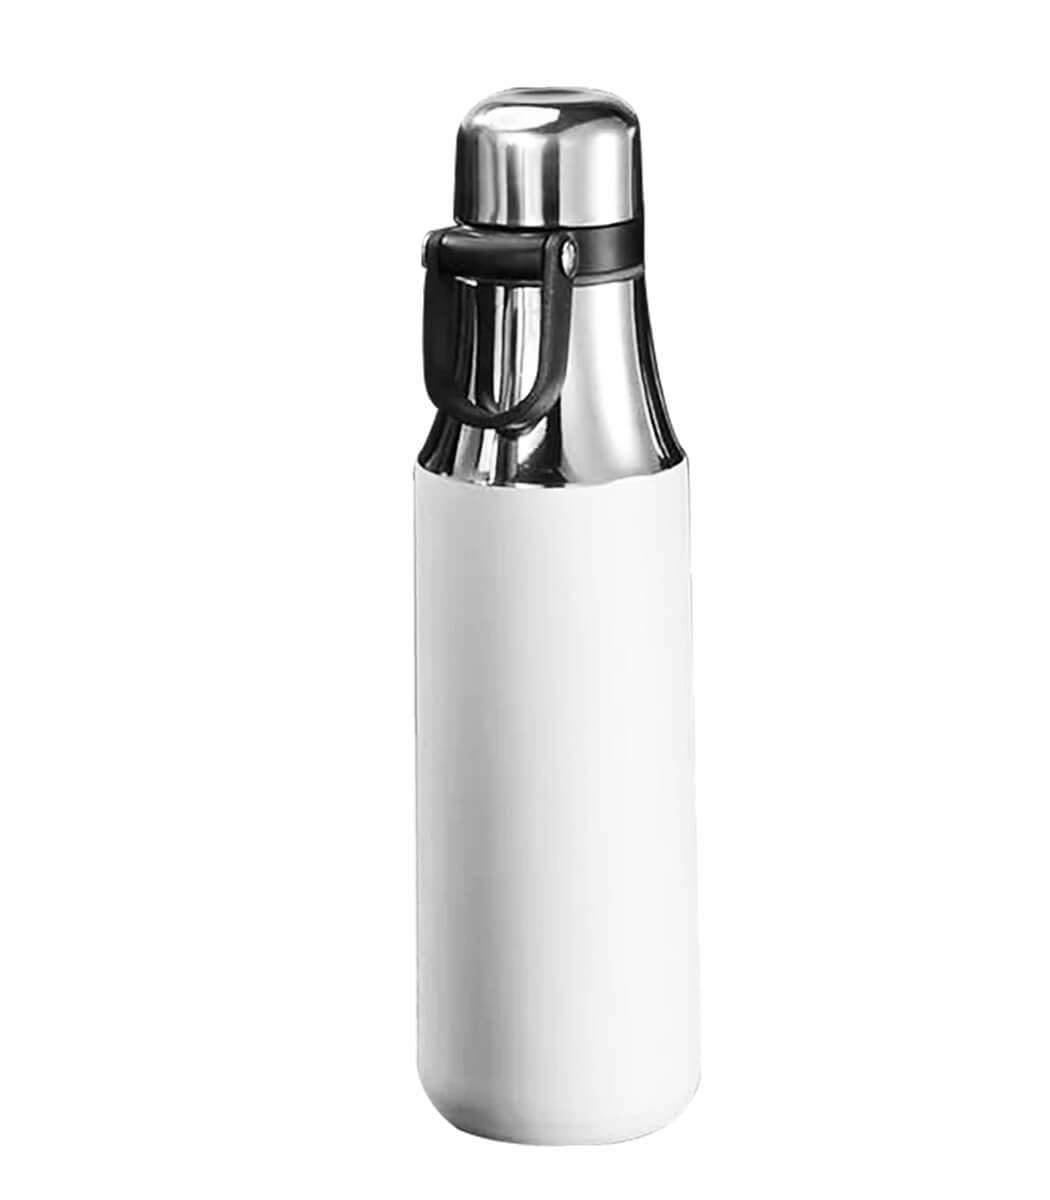 What is a stainless steel vacuum flask？